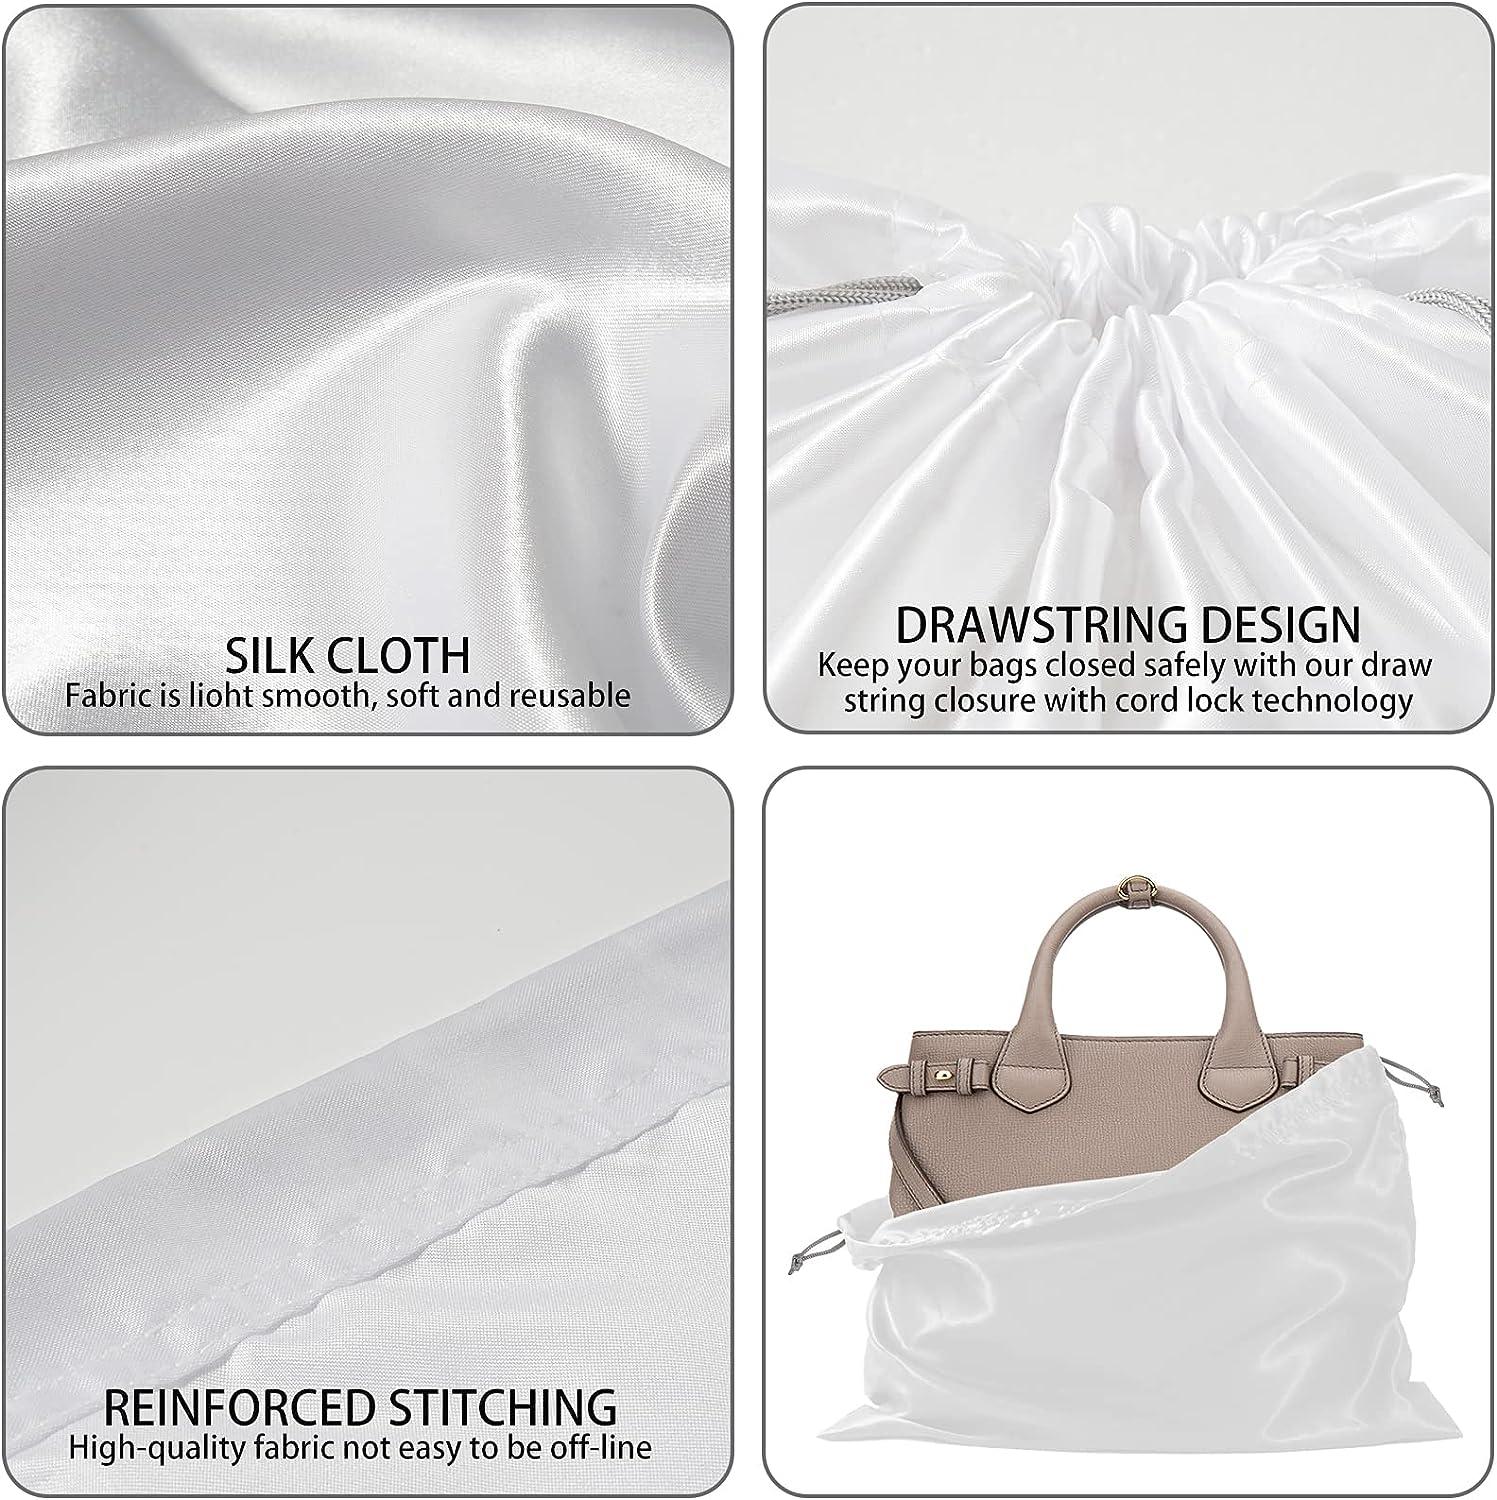 TKTTBD Dust Cover Storage Bags Silk Cloth with Drawstring Pouch, 5 Pack Large Dust Bags for Handbags Luxuries Handbags Tote Purses Shoes Boots, Dust